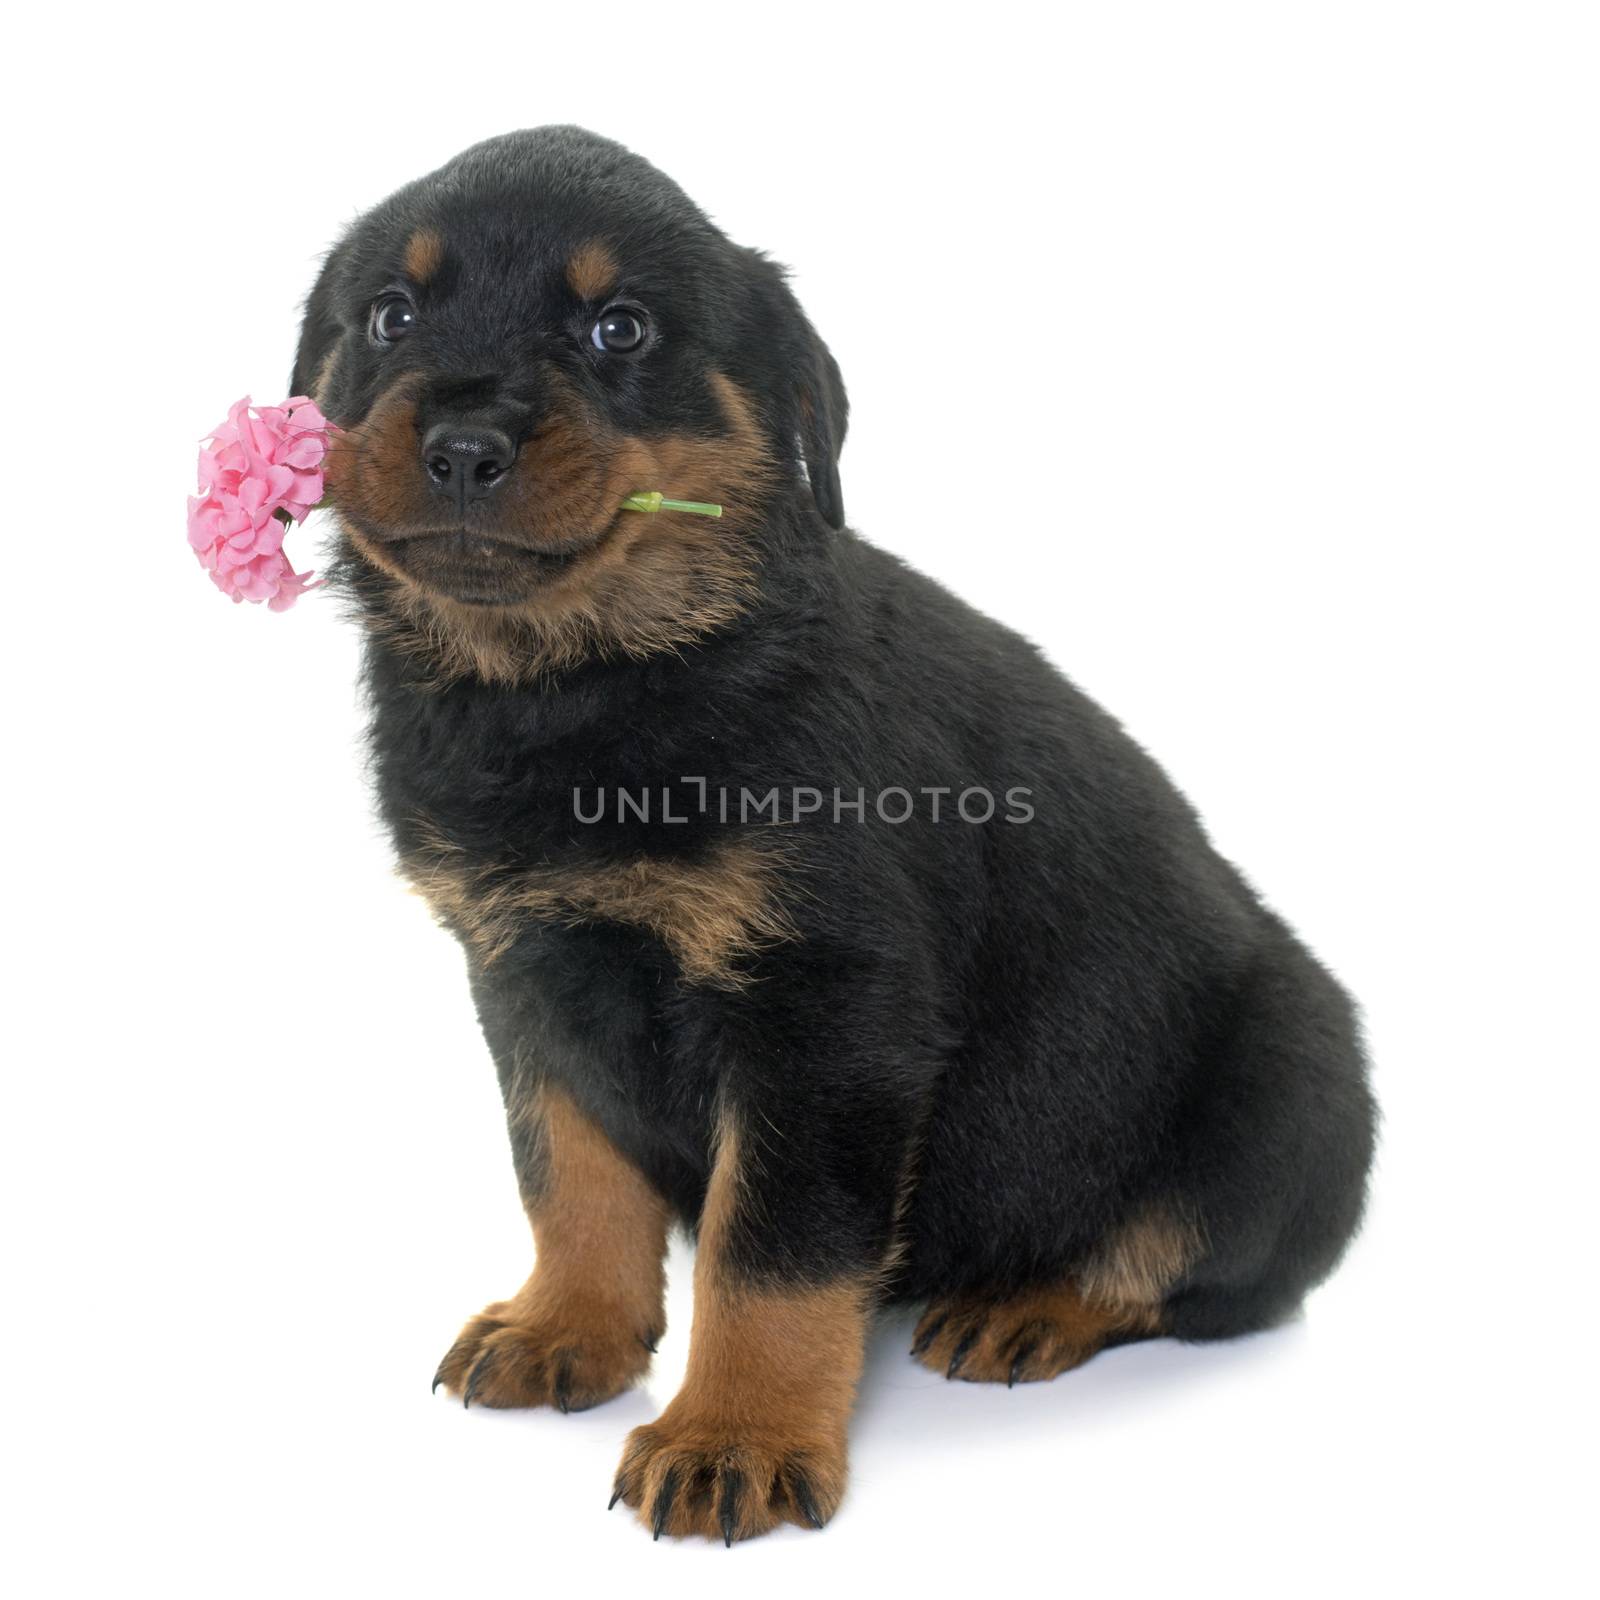 puppy rottweiler and flower in front of white background